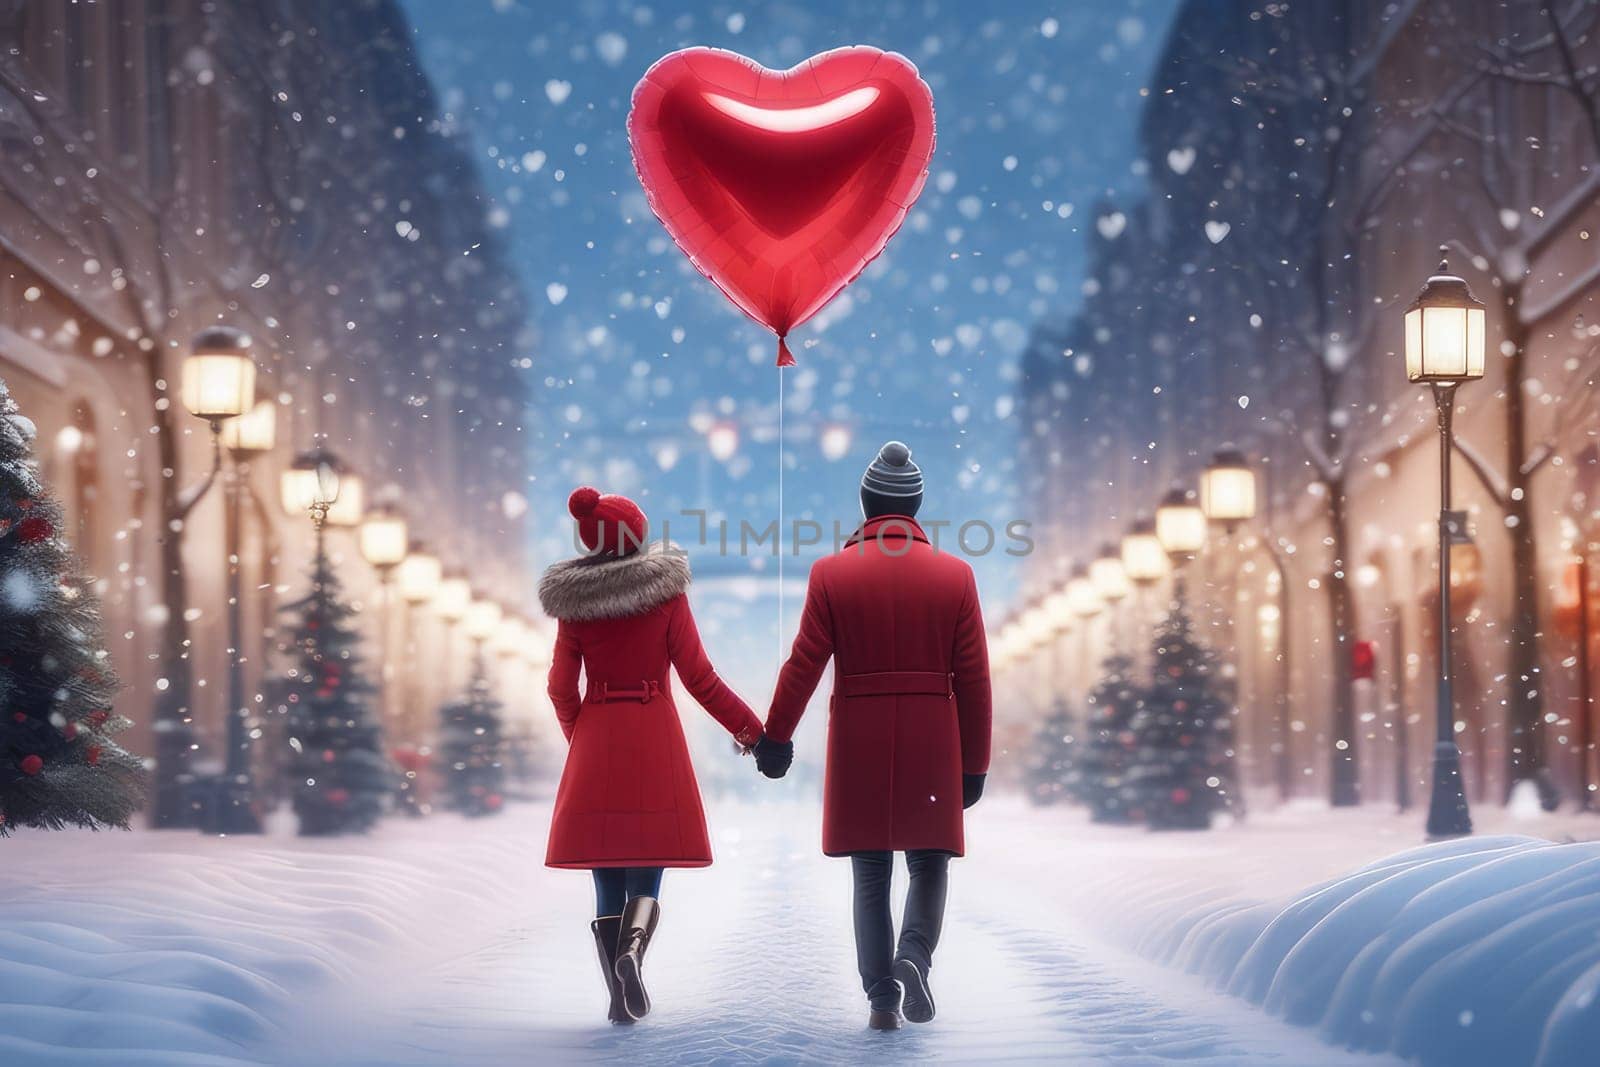 A couple walks through a snow-covered city with a heart-shaped balloon, rear view. The concept of celebrating Valentine's Day. by Annu1tochka